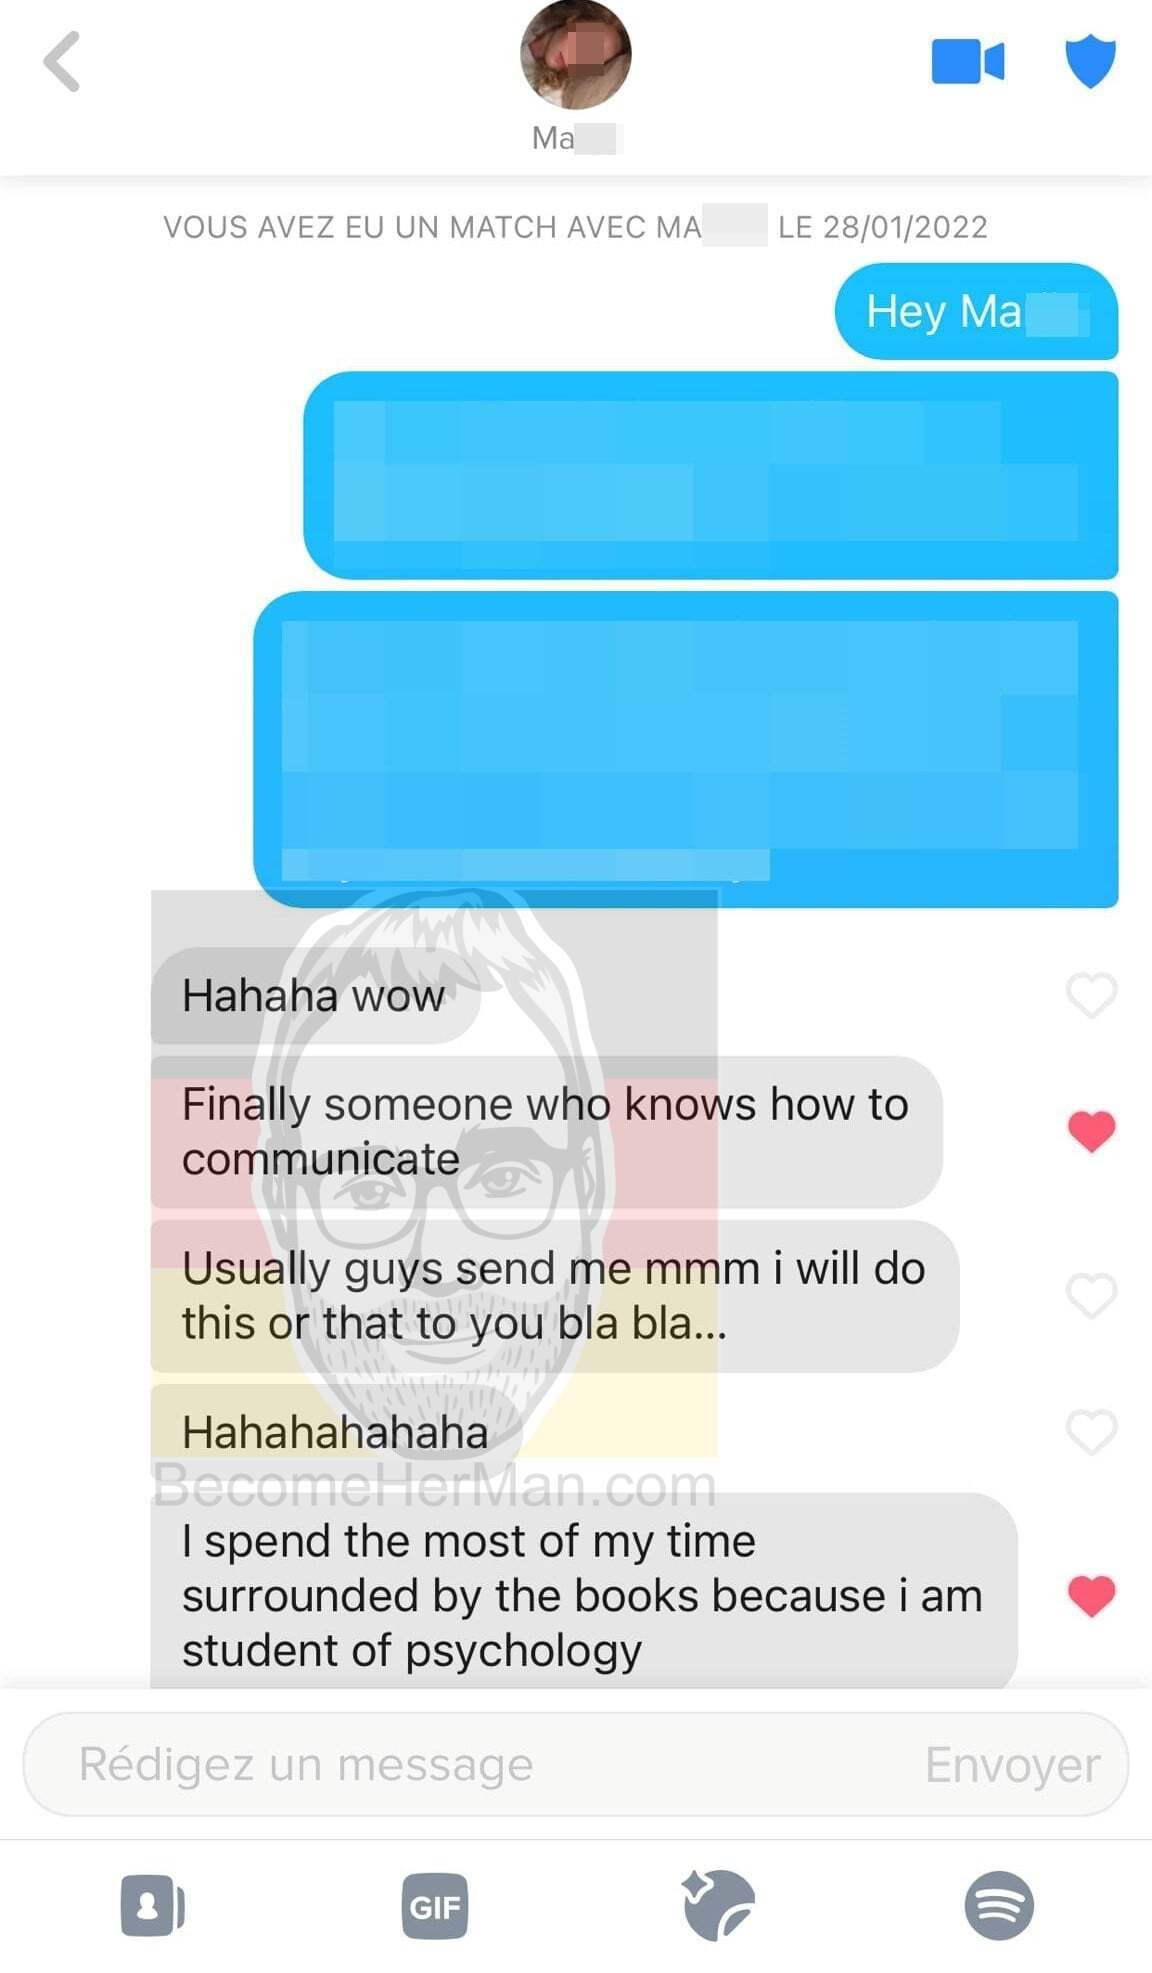 How-To-Make-a-Woman-Fall-In-Love-With-You-Tinder-Message